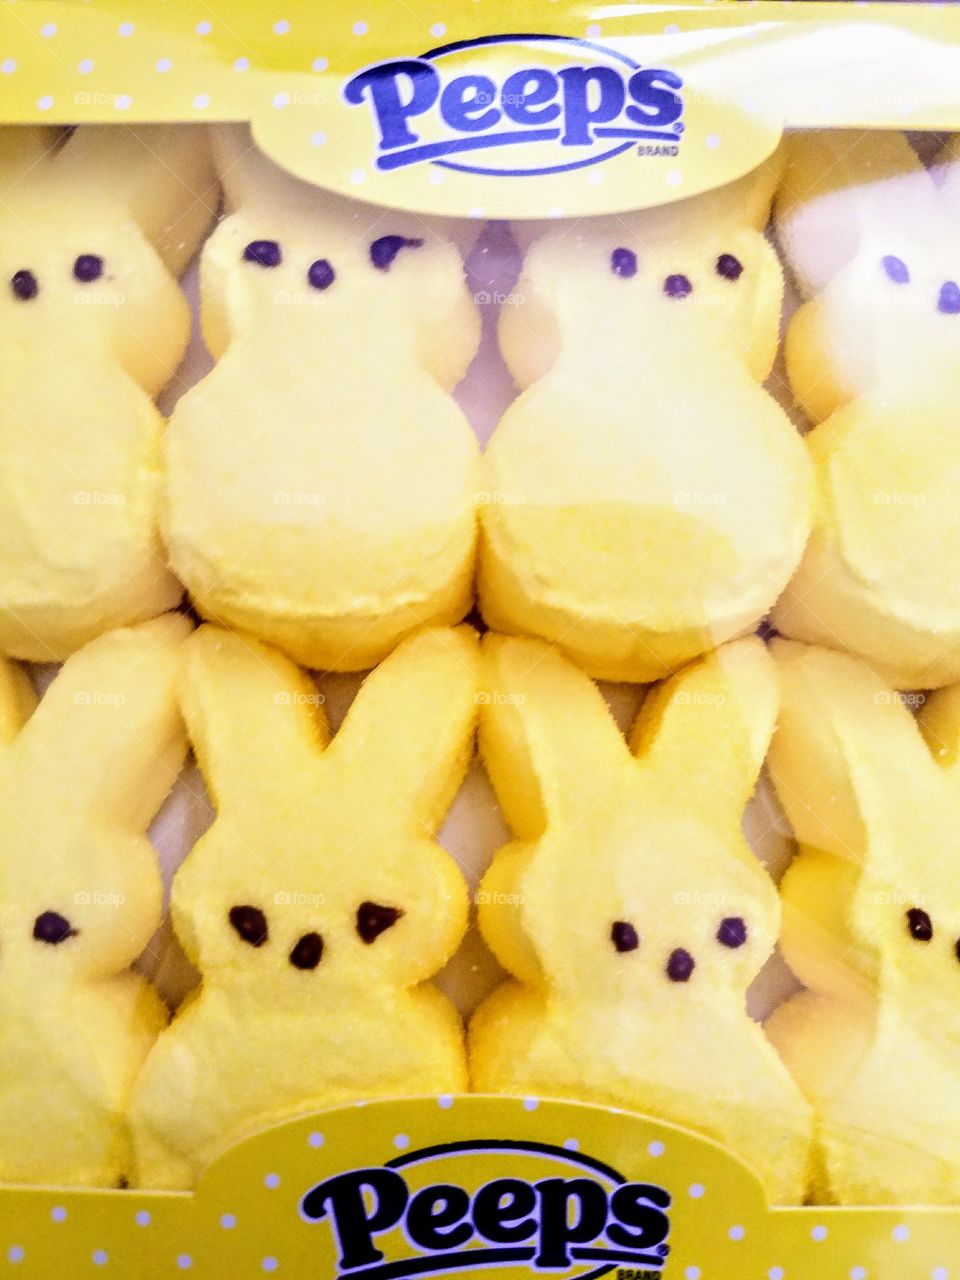 Peeps at Easter time